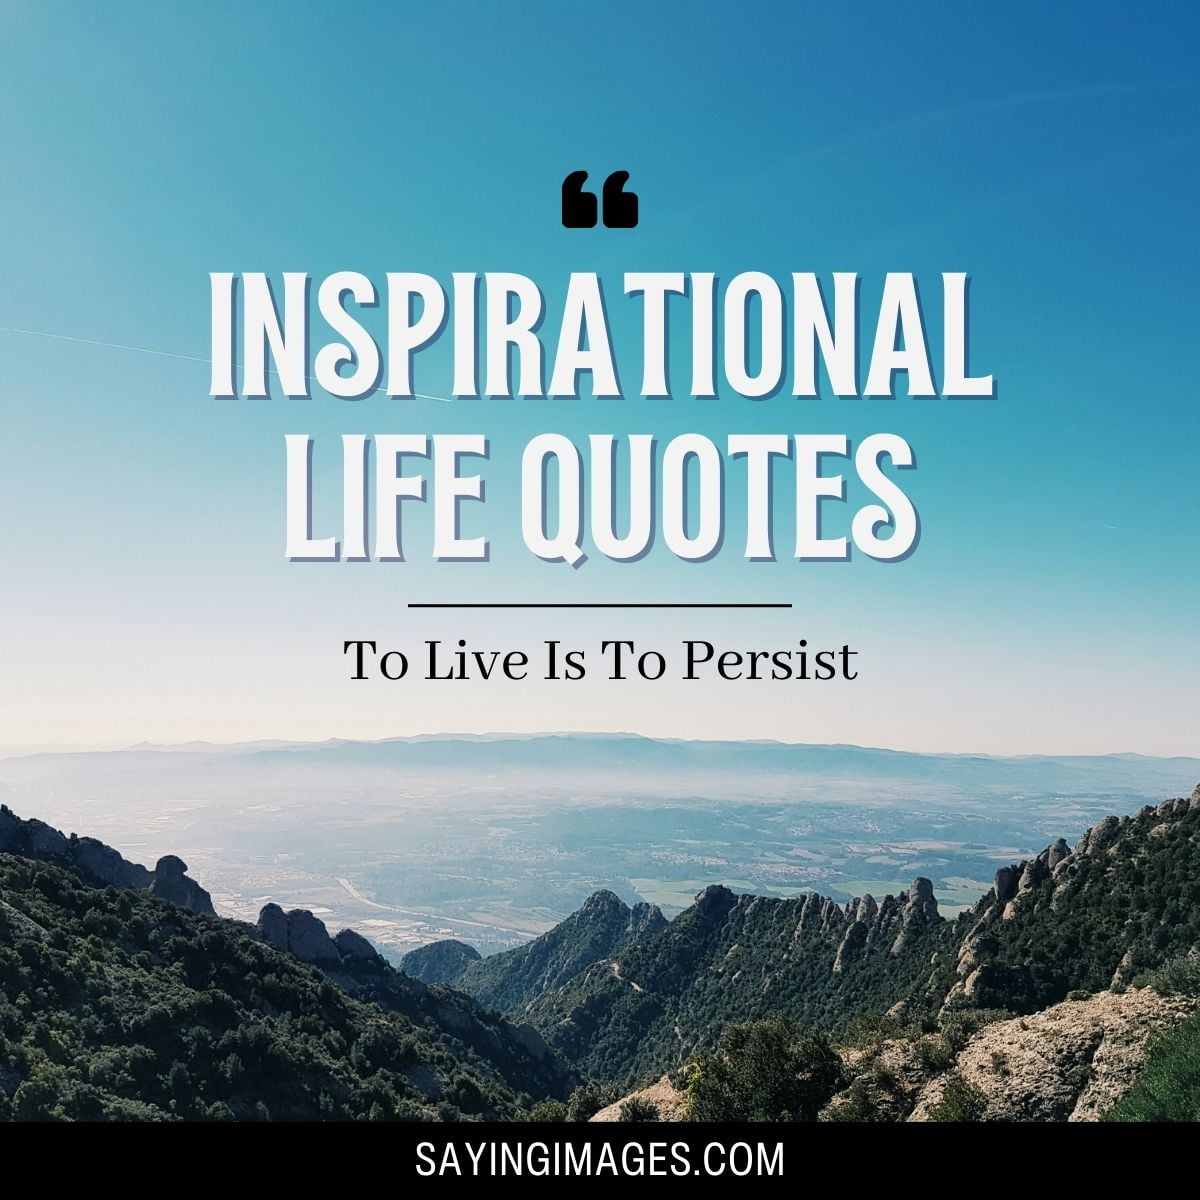 Inspirational Life Quotes: To Live Is to Persist